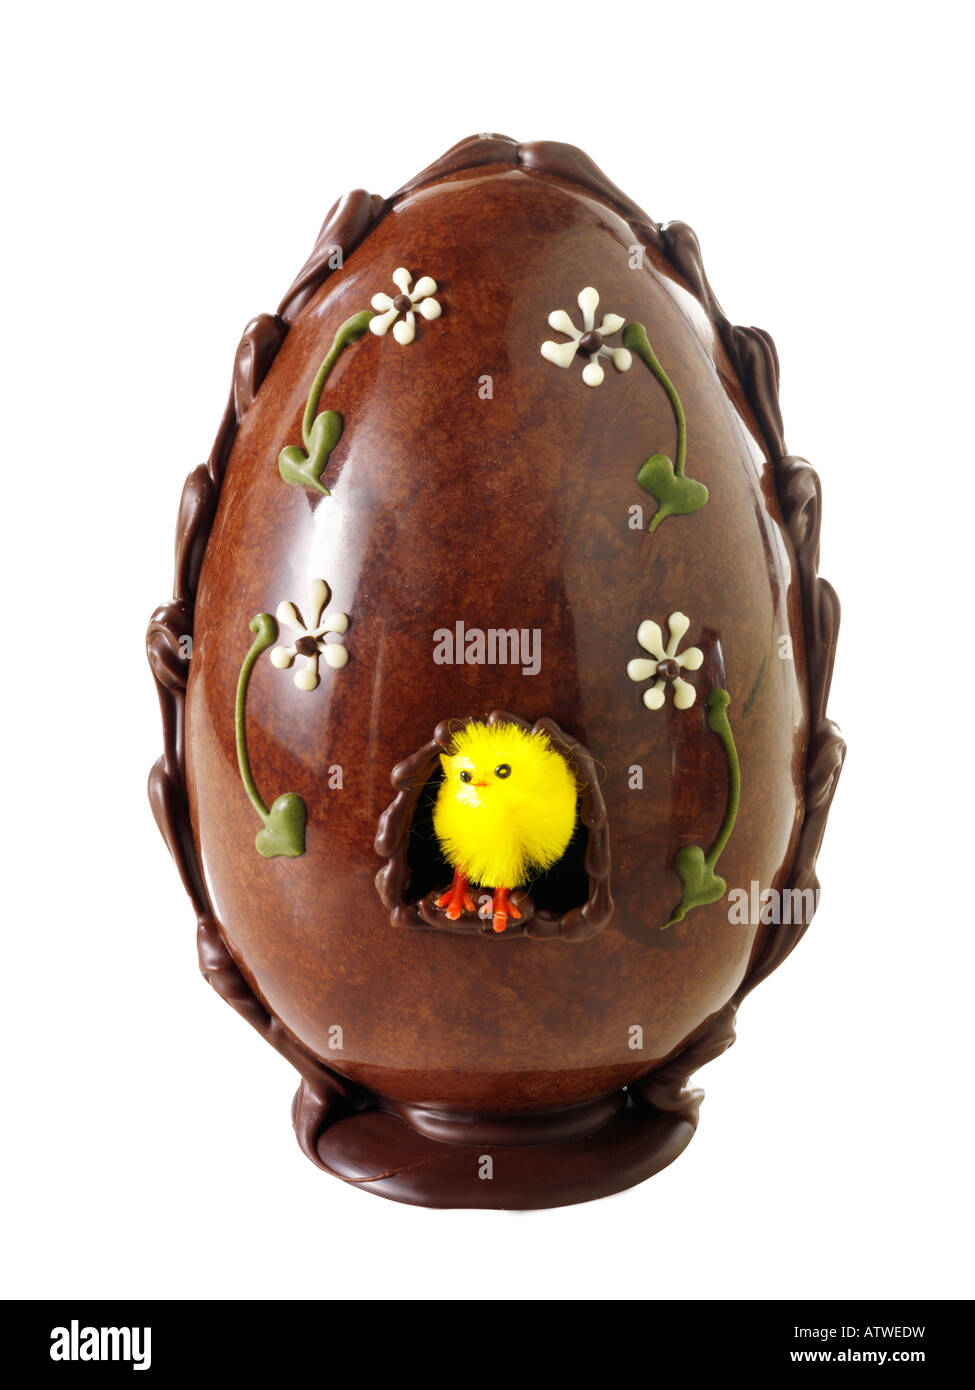 Traditional hand made decorated chocolate Easter eggs Stock Photo